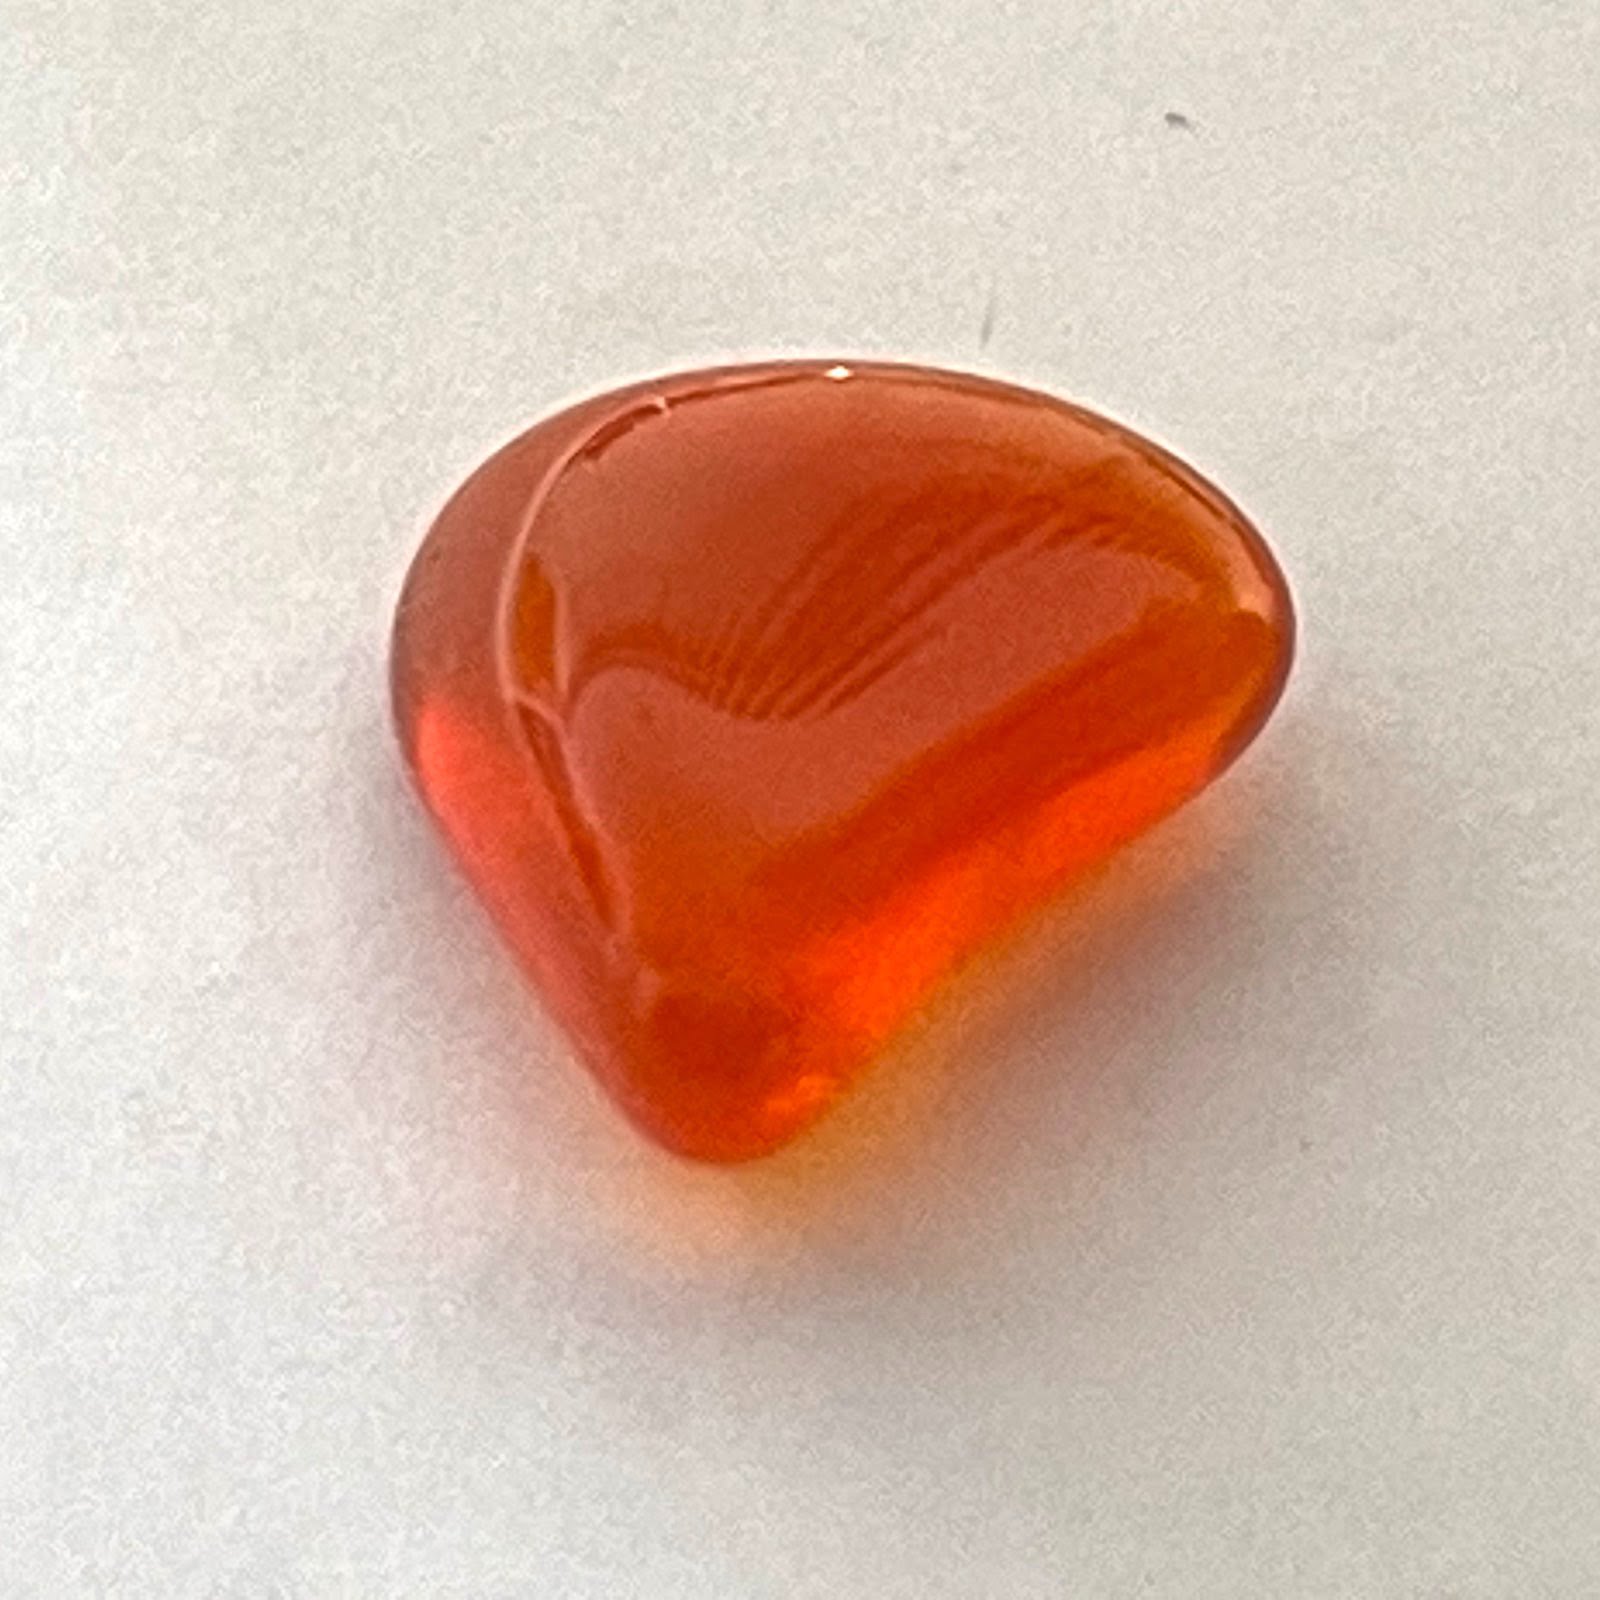 FOPL7 1.4 ct Fire Opal from Mexico Transparent and Beautiful